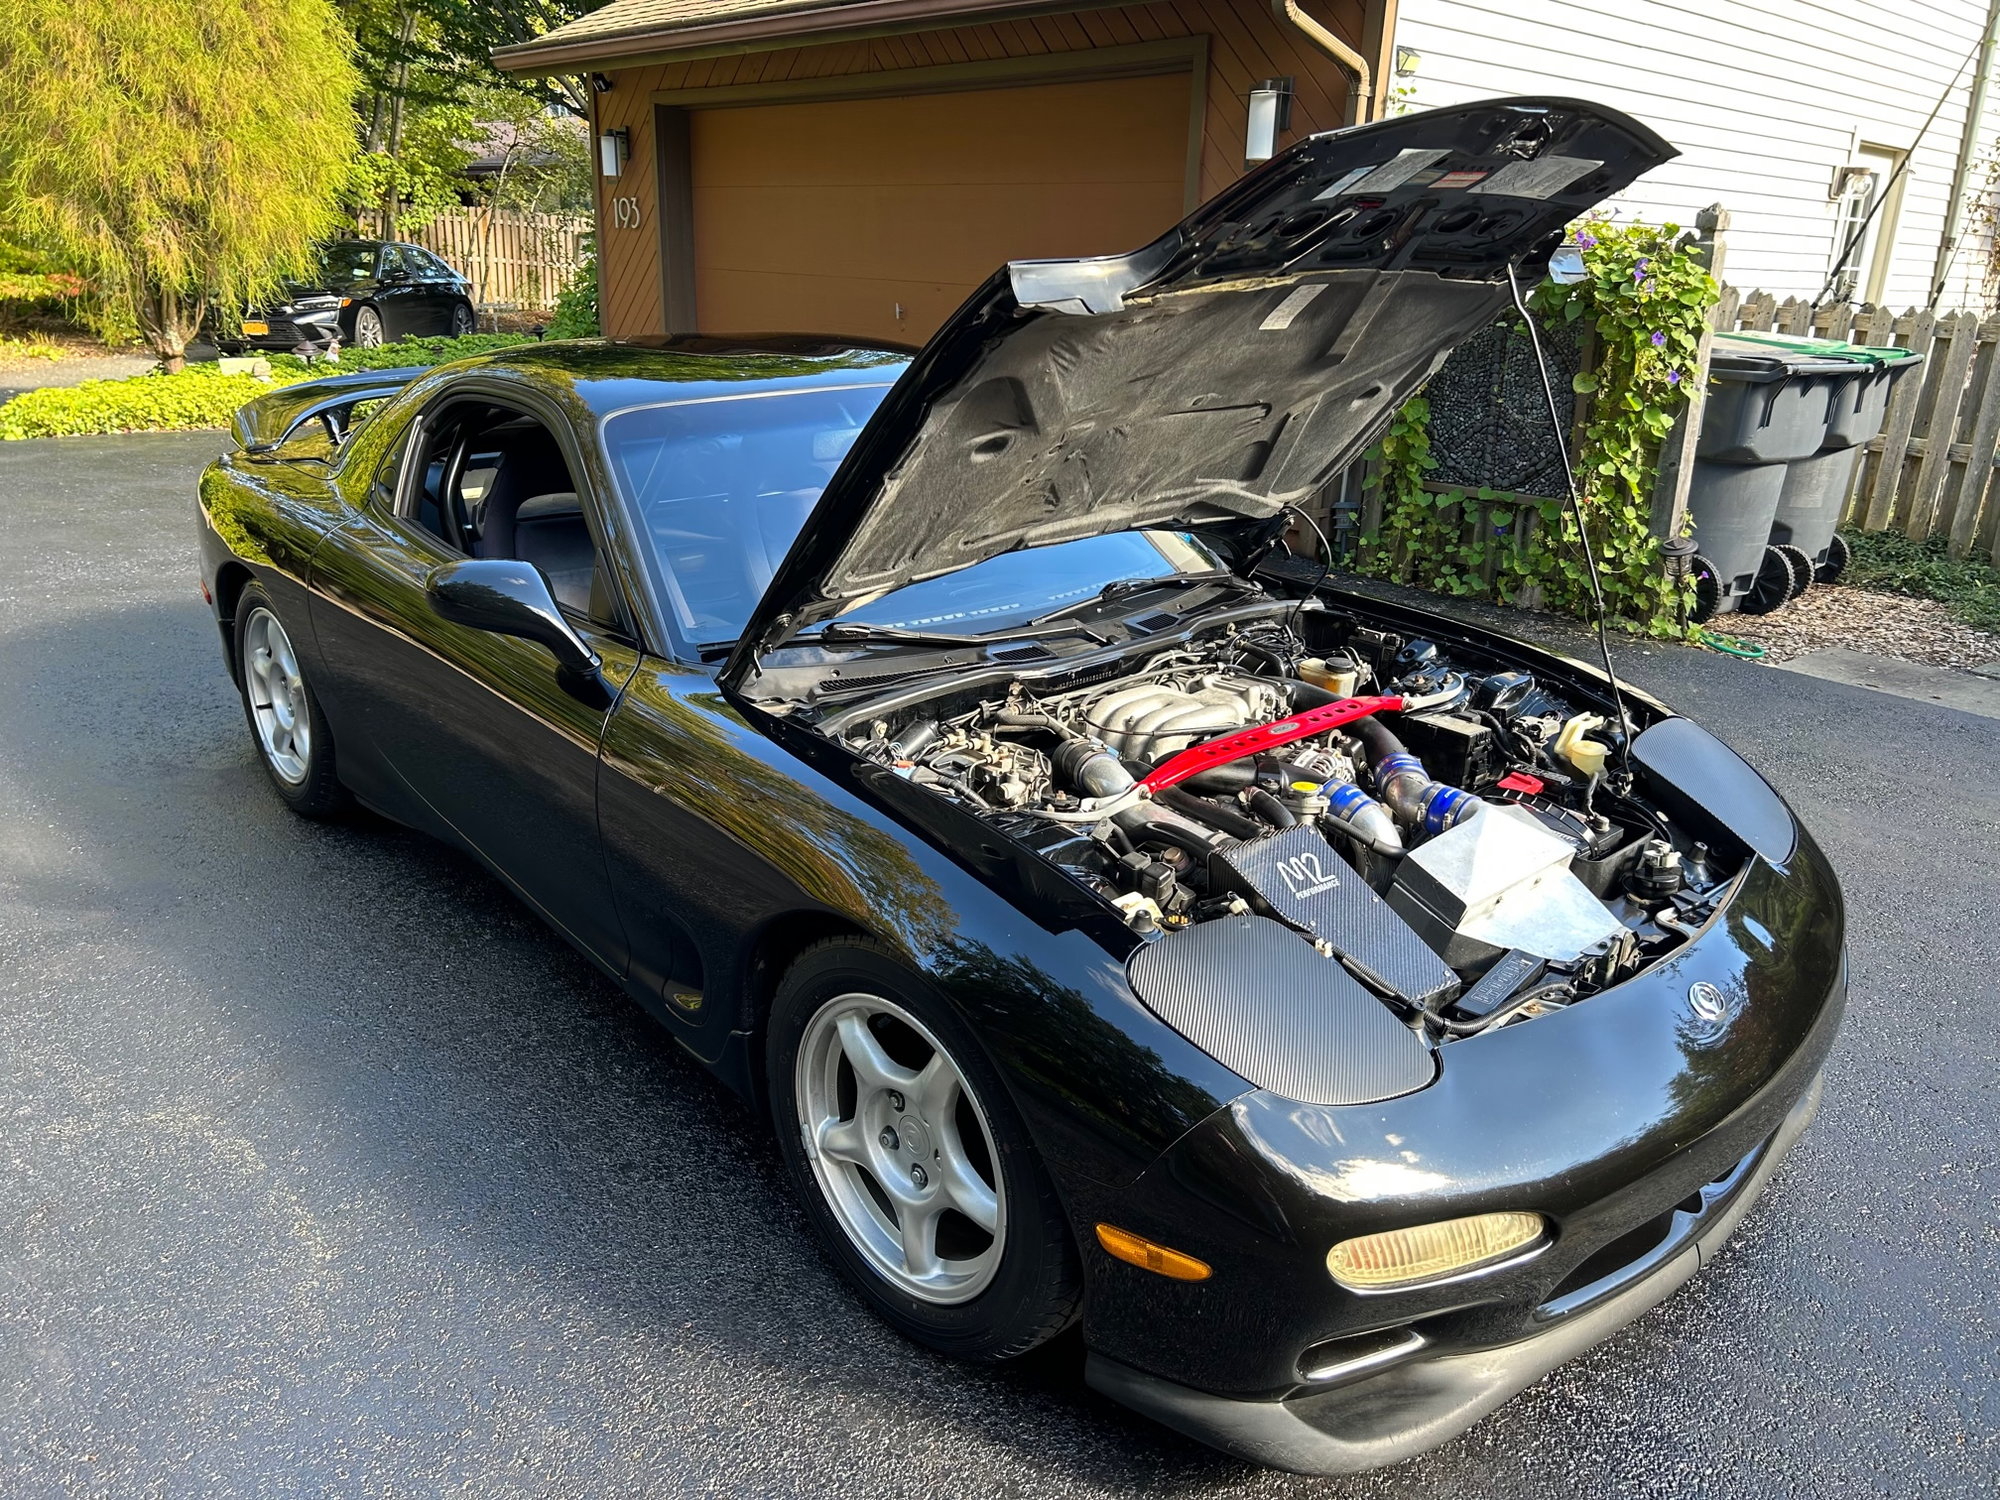 1994 Mazda RX-7 - RARE 1994 Mazda RX-7 R2 Model 1 of only 156 Made! - Used - VIN JM1FD3338R0300775 - 85,550 Miles - 2WD - Manual - Coupe - Black - Middletown, NY 10940, United States